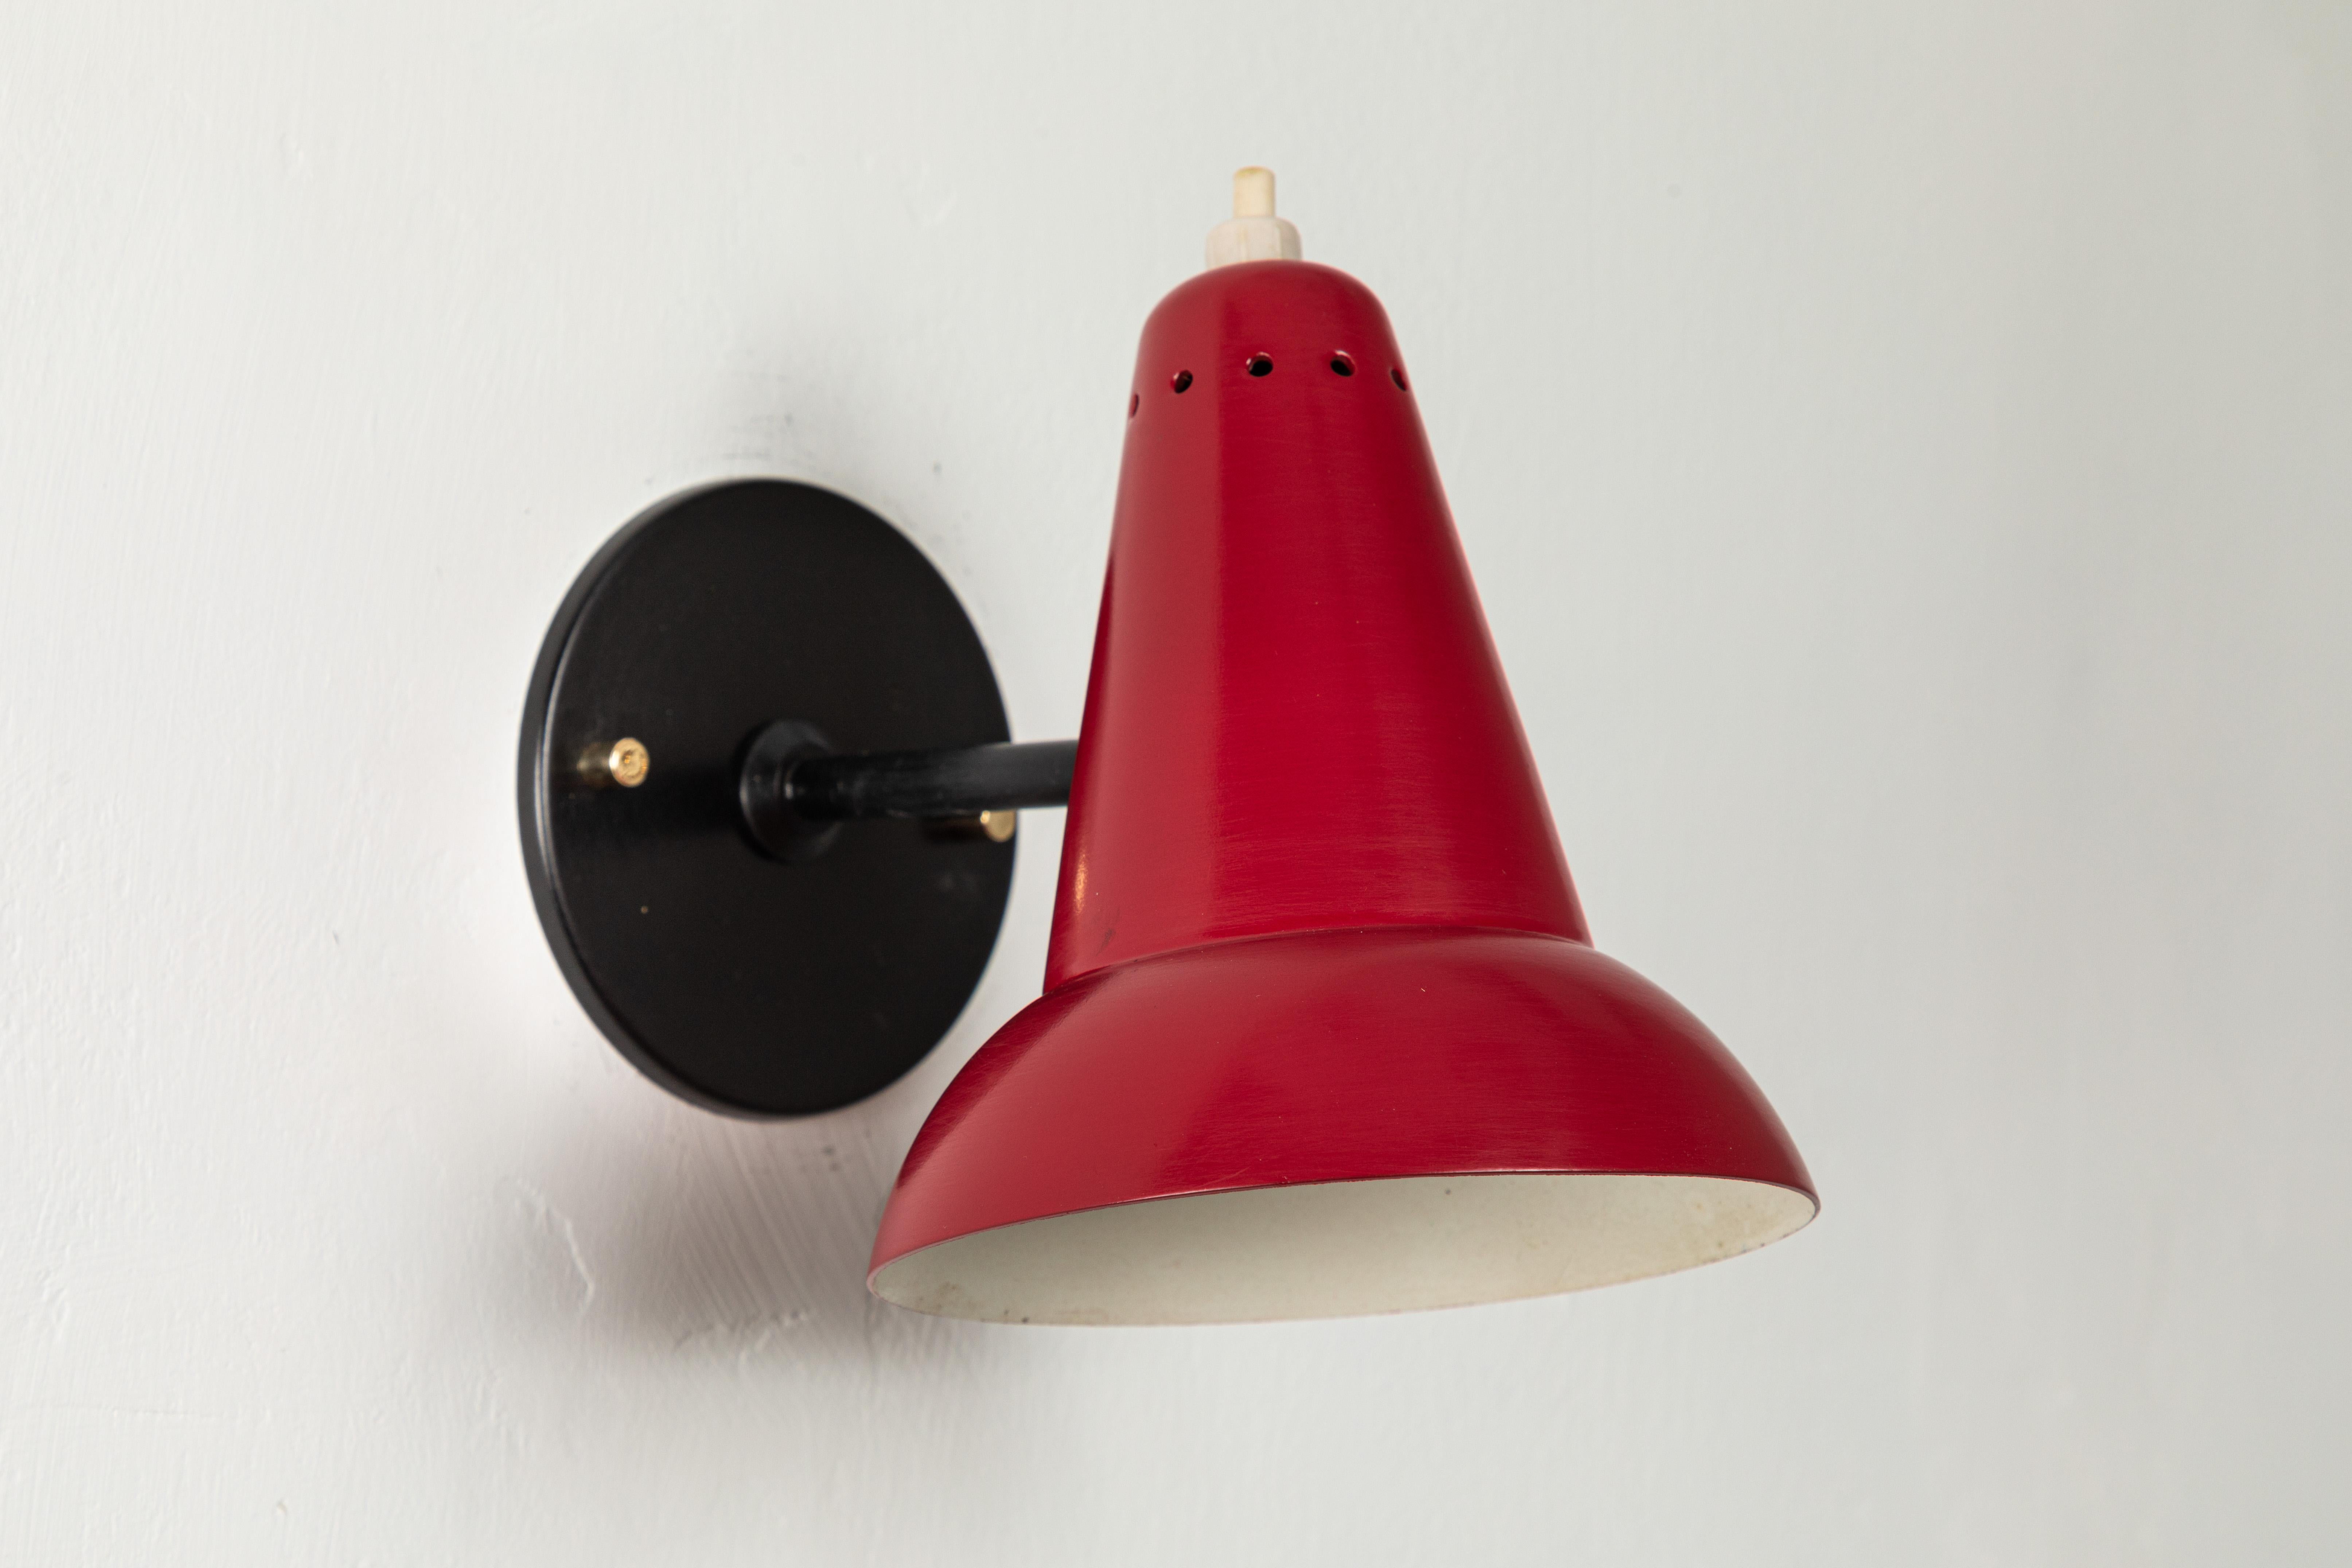 1950s Italian red articulating sconce attributed to Gino Sarfatti. Executed in brass and red painted aluminum. Sconce pivots up/down and left/right on a ball joint. Custom black backplate with brass hardware for hardwiring mounting over standard US